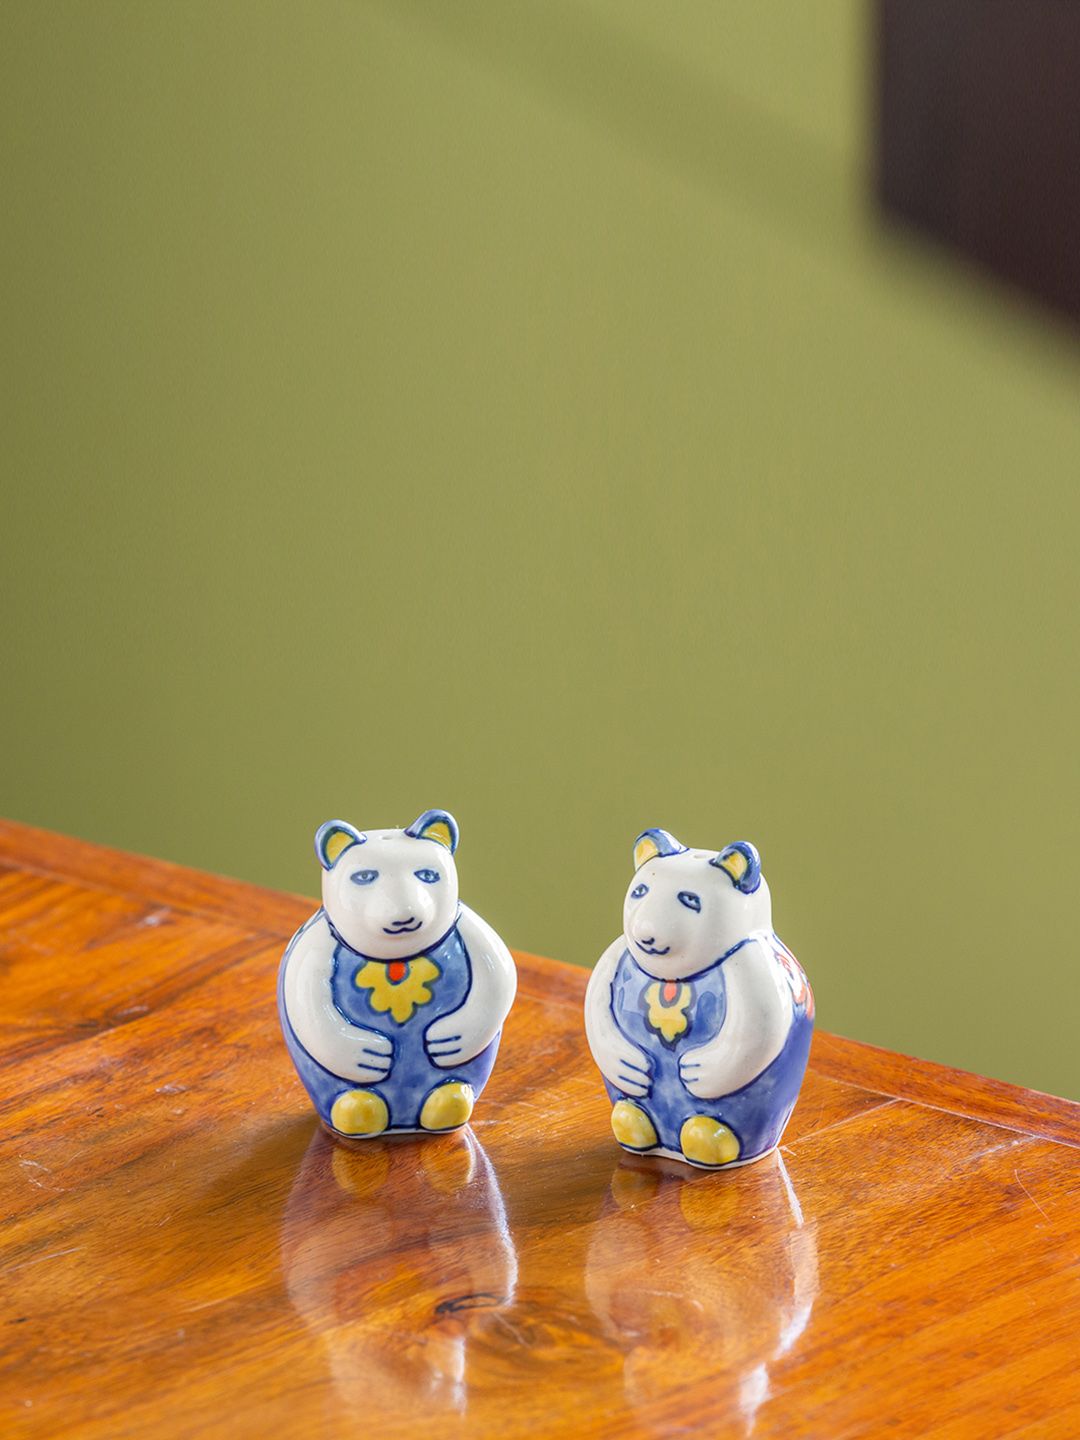 ExclusiveLane Set Of 2 Blue & White Hand-Painted Ceramic Salt & Pepper Shakers 50 ML Price in India